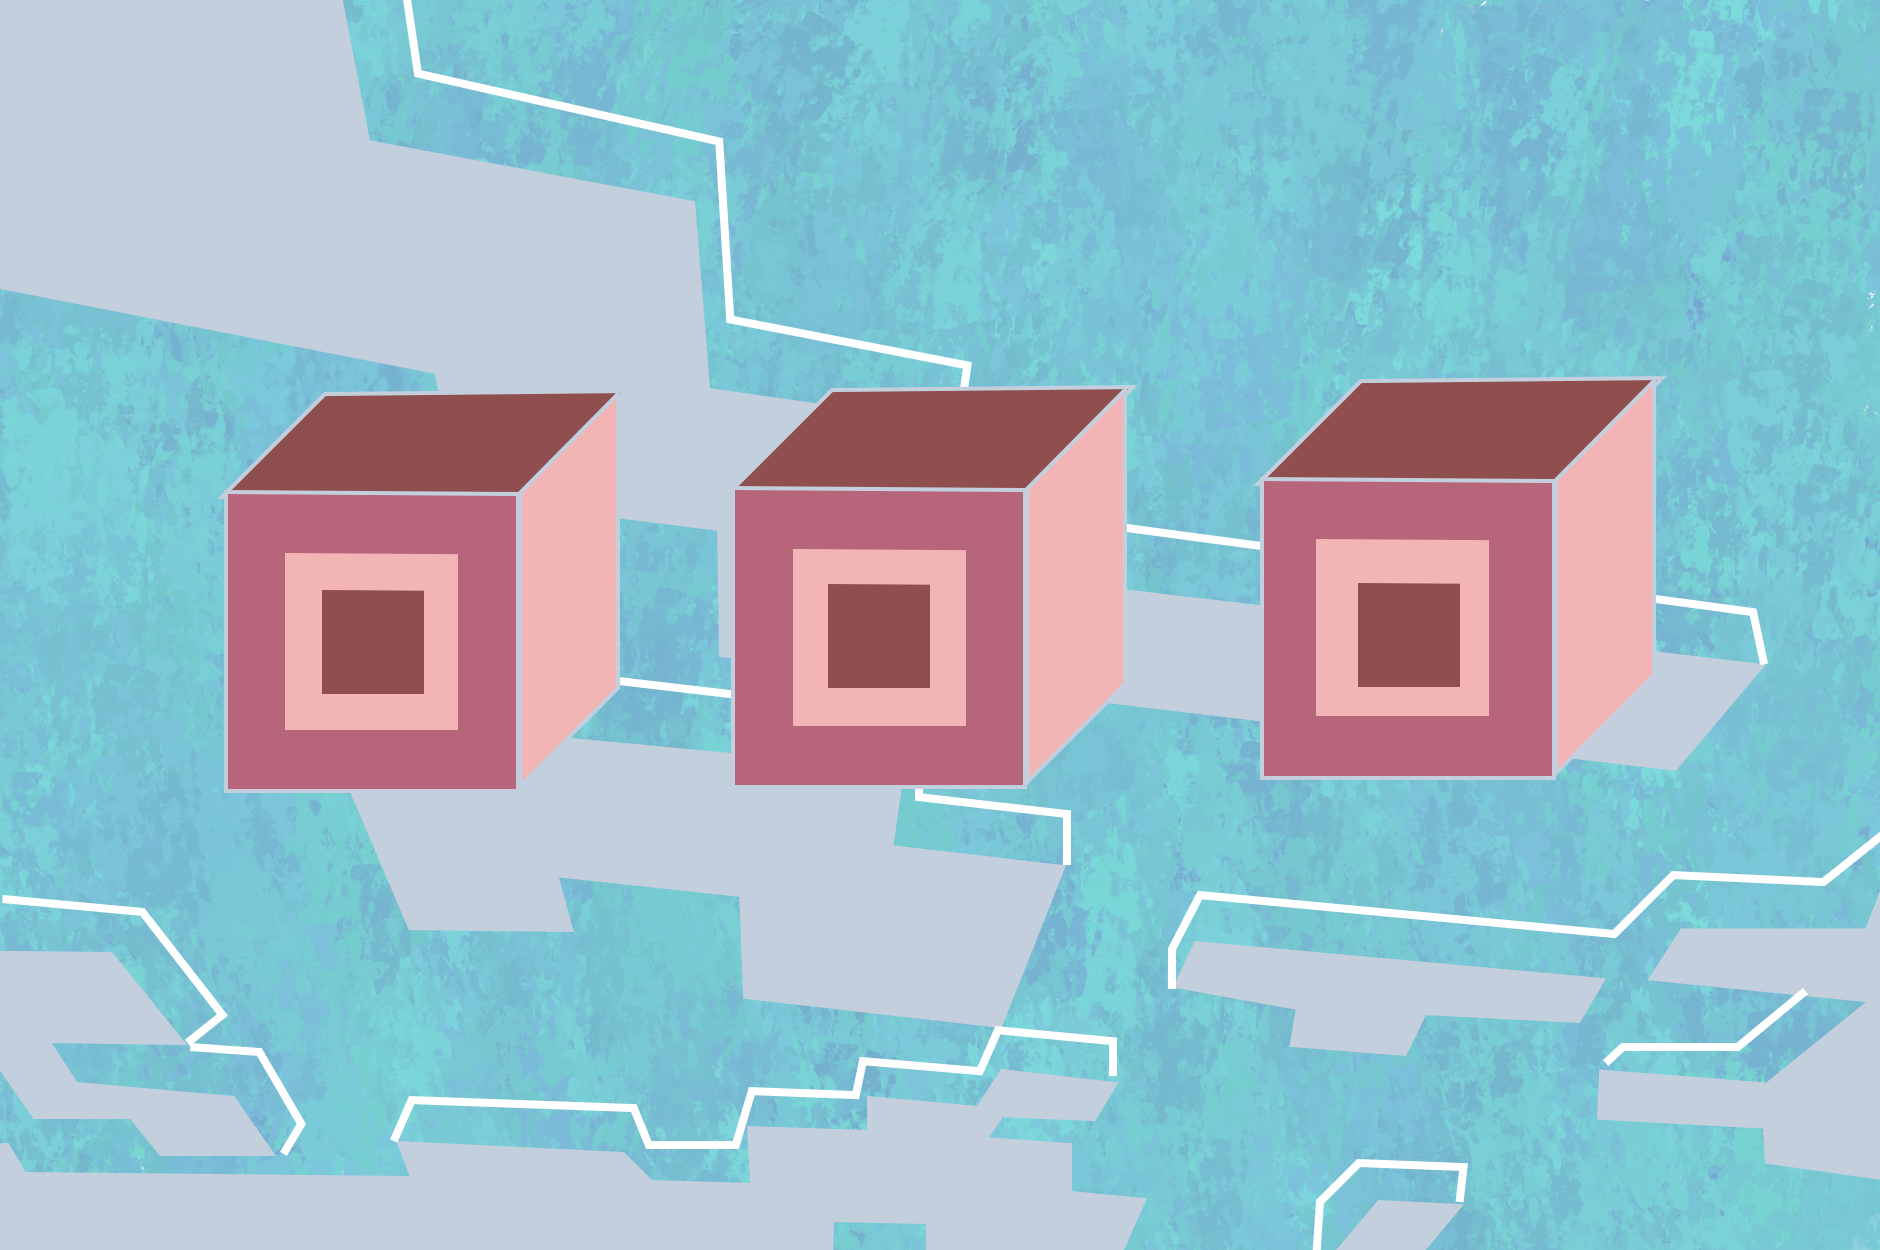 three side-by-side tan and brown cubes floating on a pixelated background of a blue sky with clouds